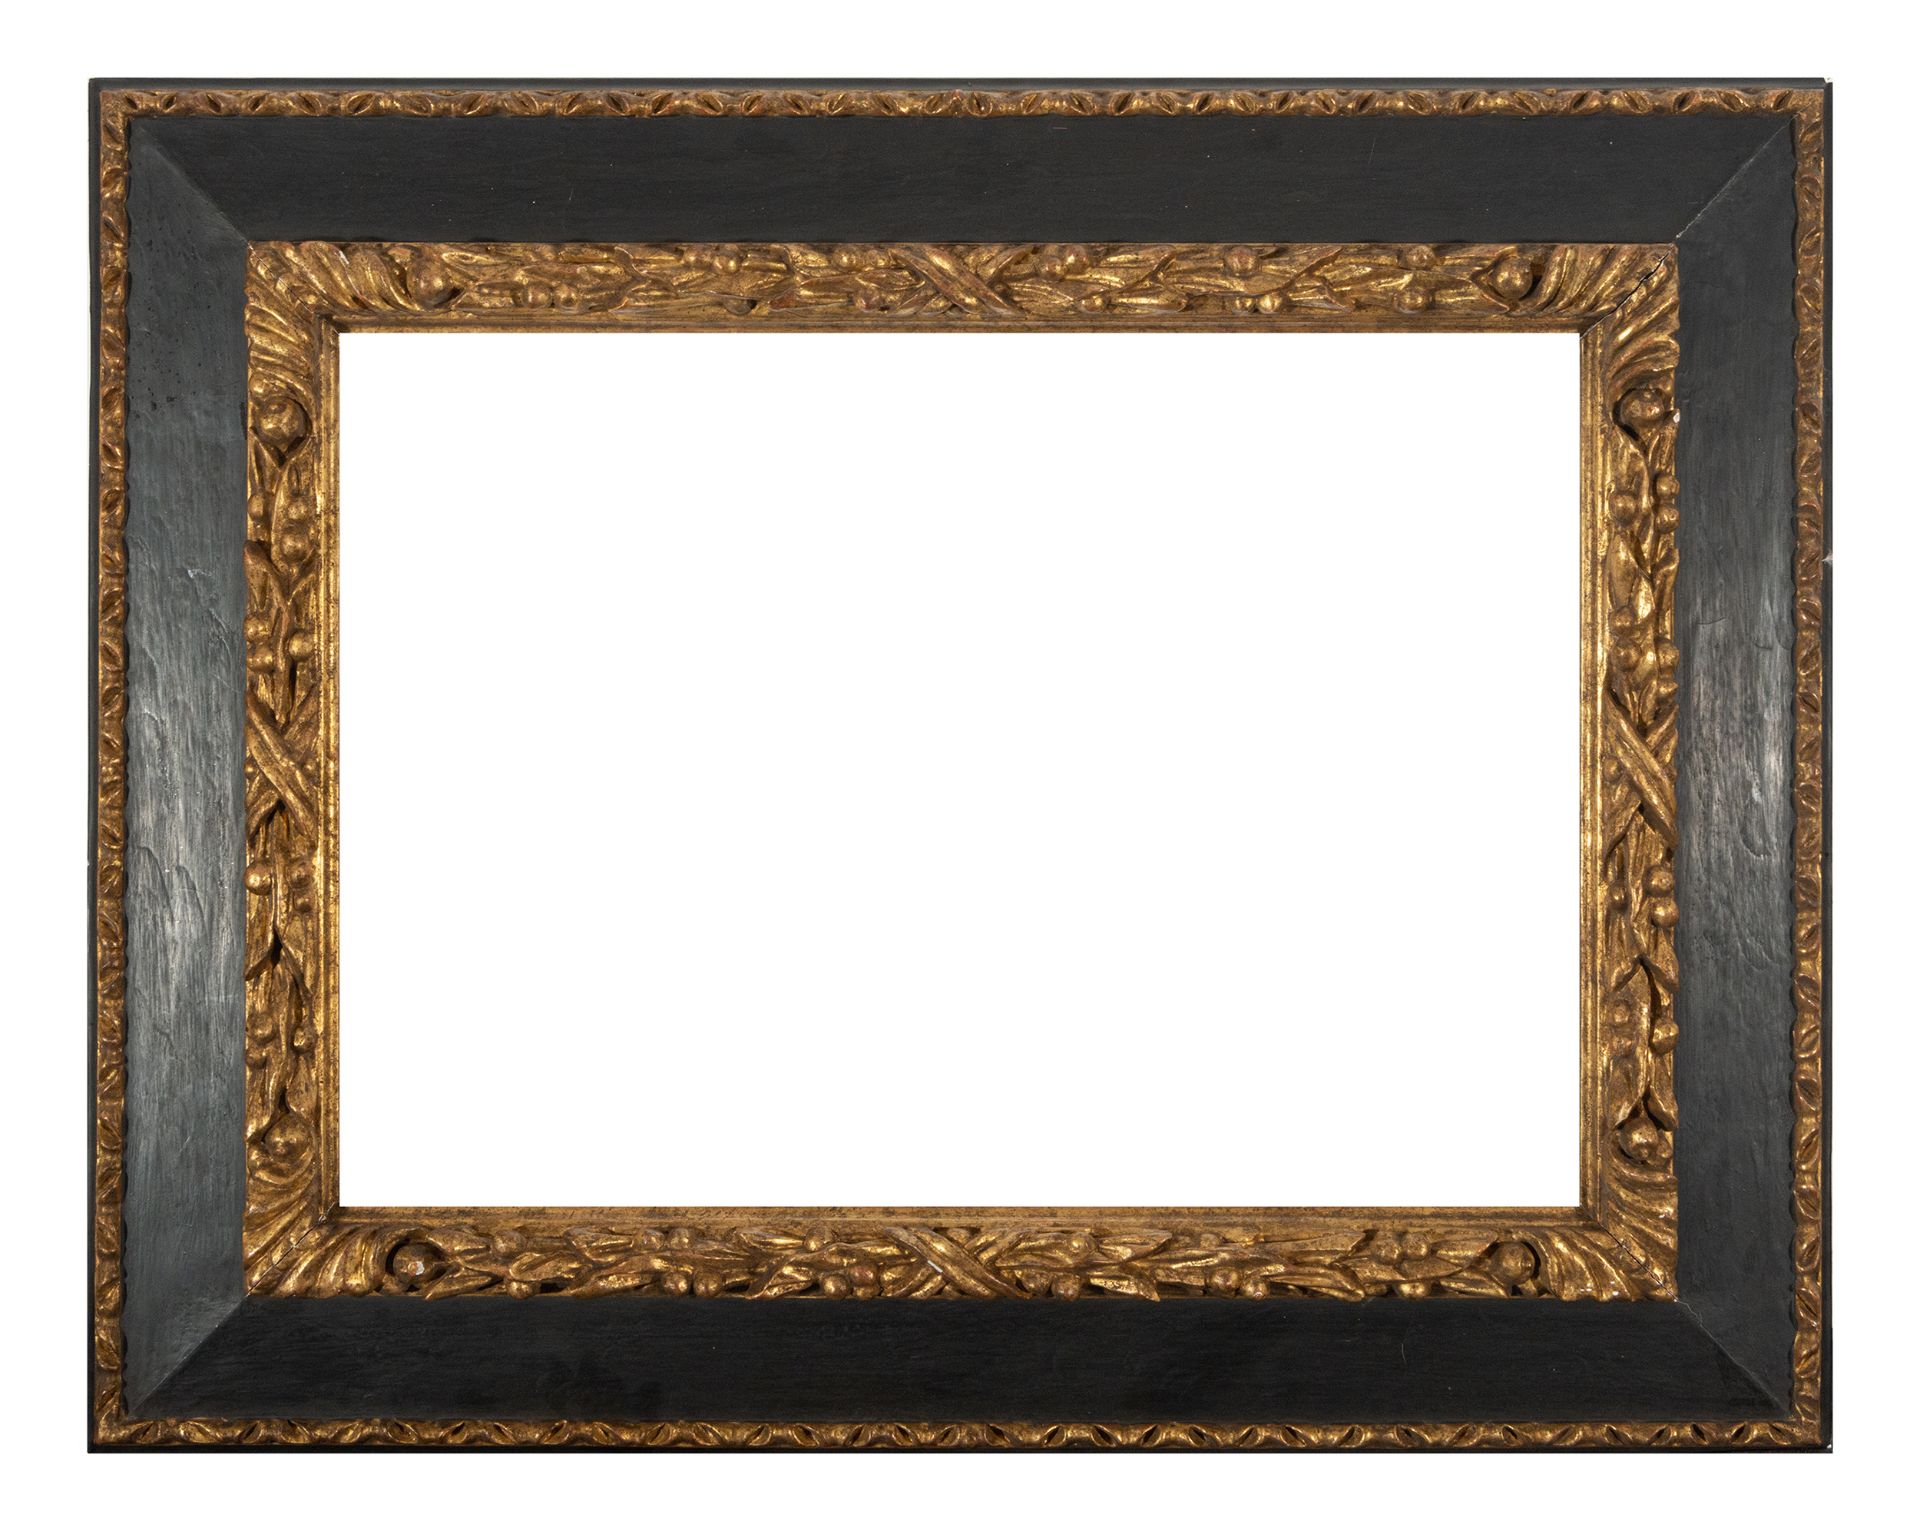 Spanish Baroque style frame in ebonized wood and carved gilt edges, 19th century